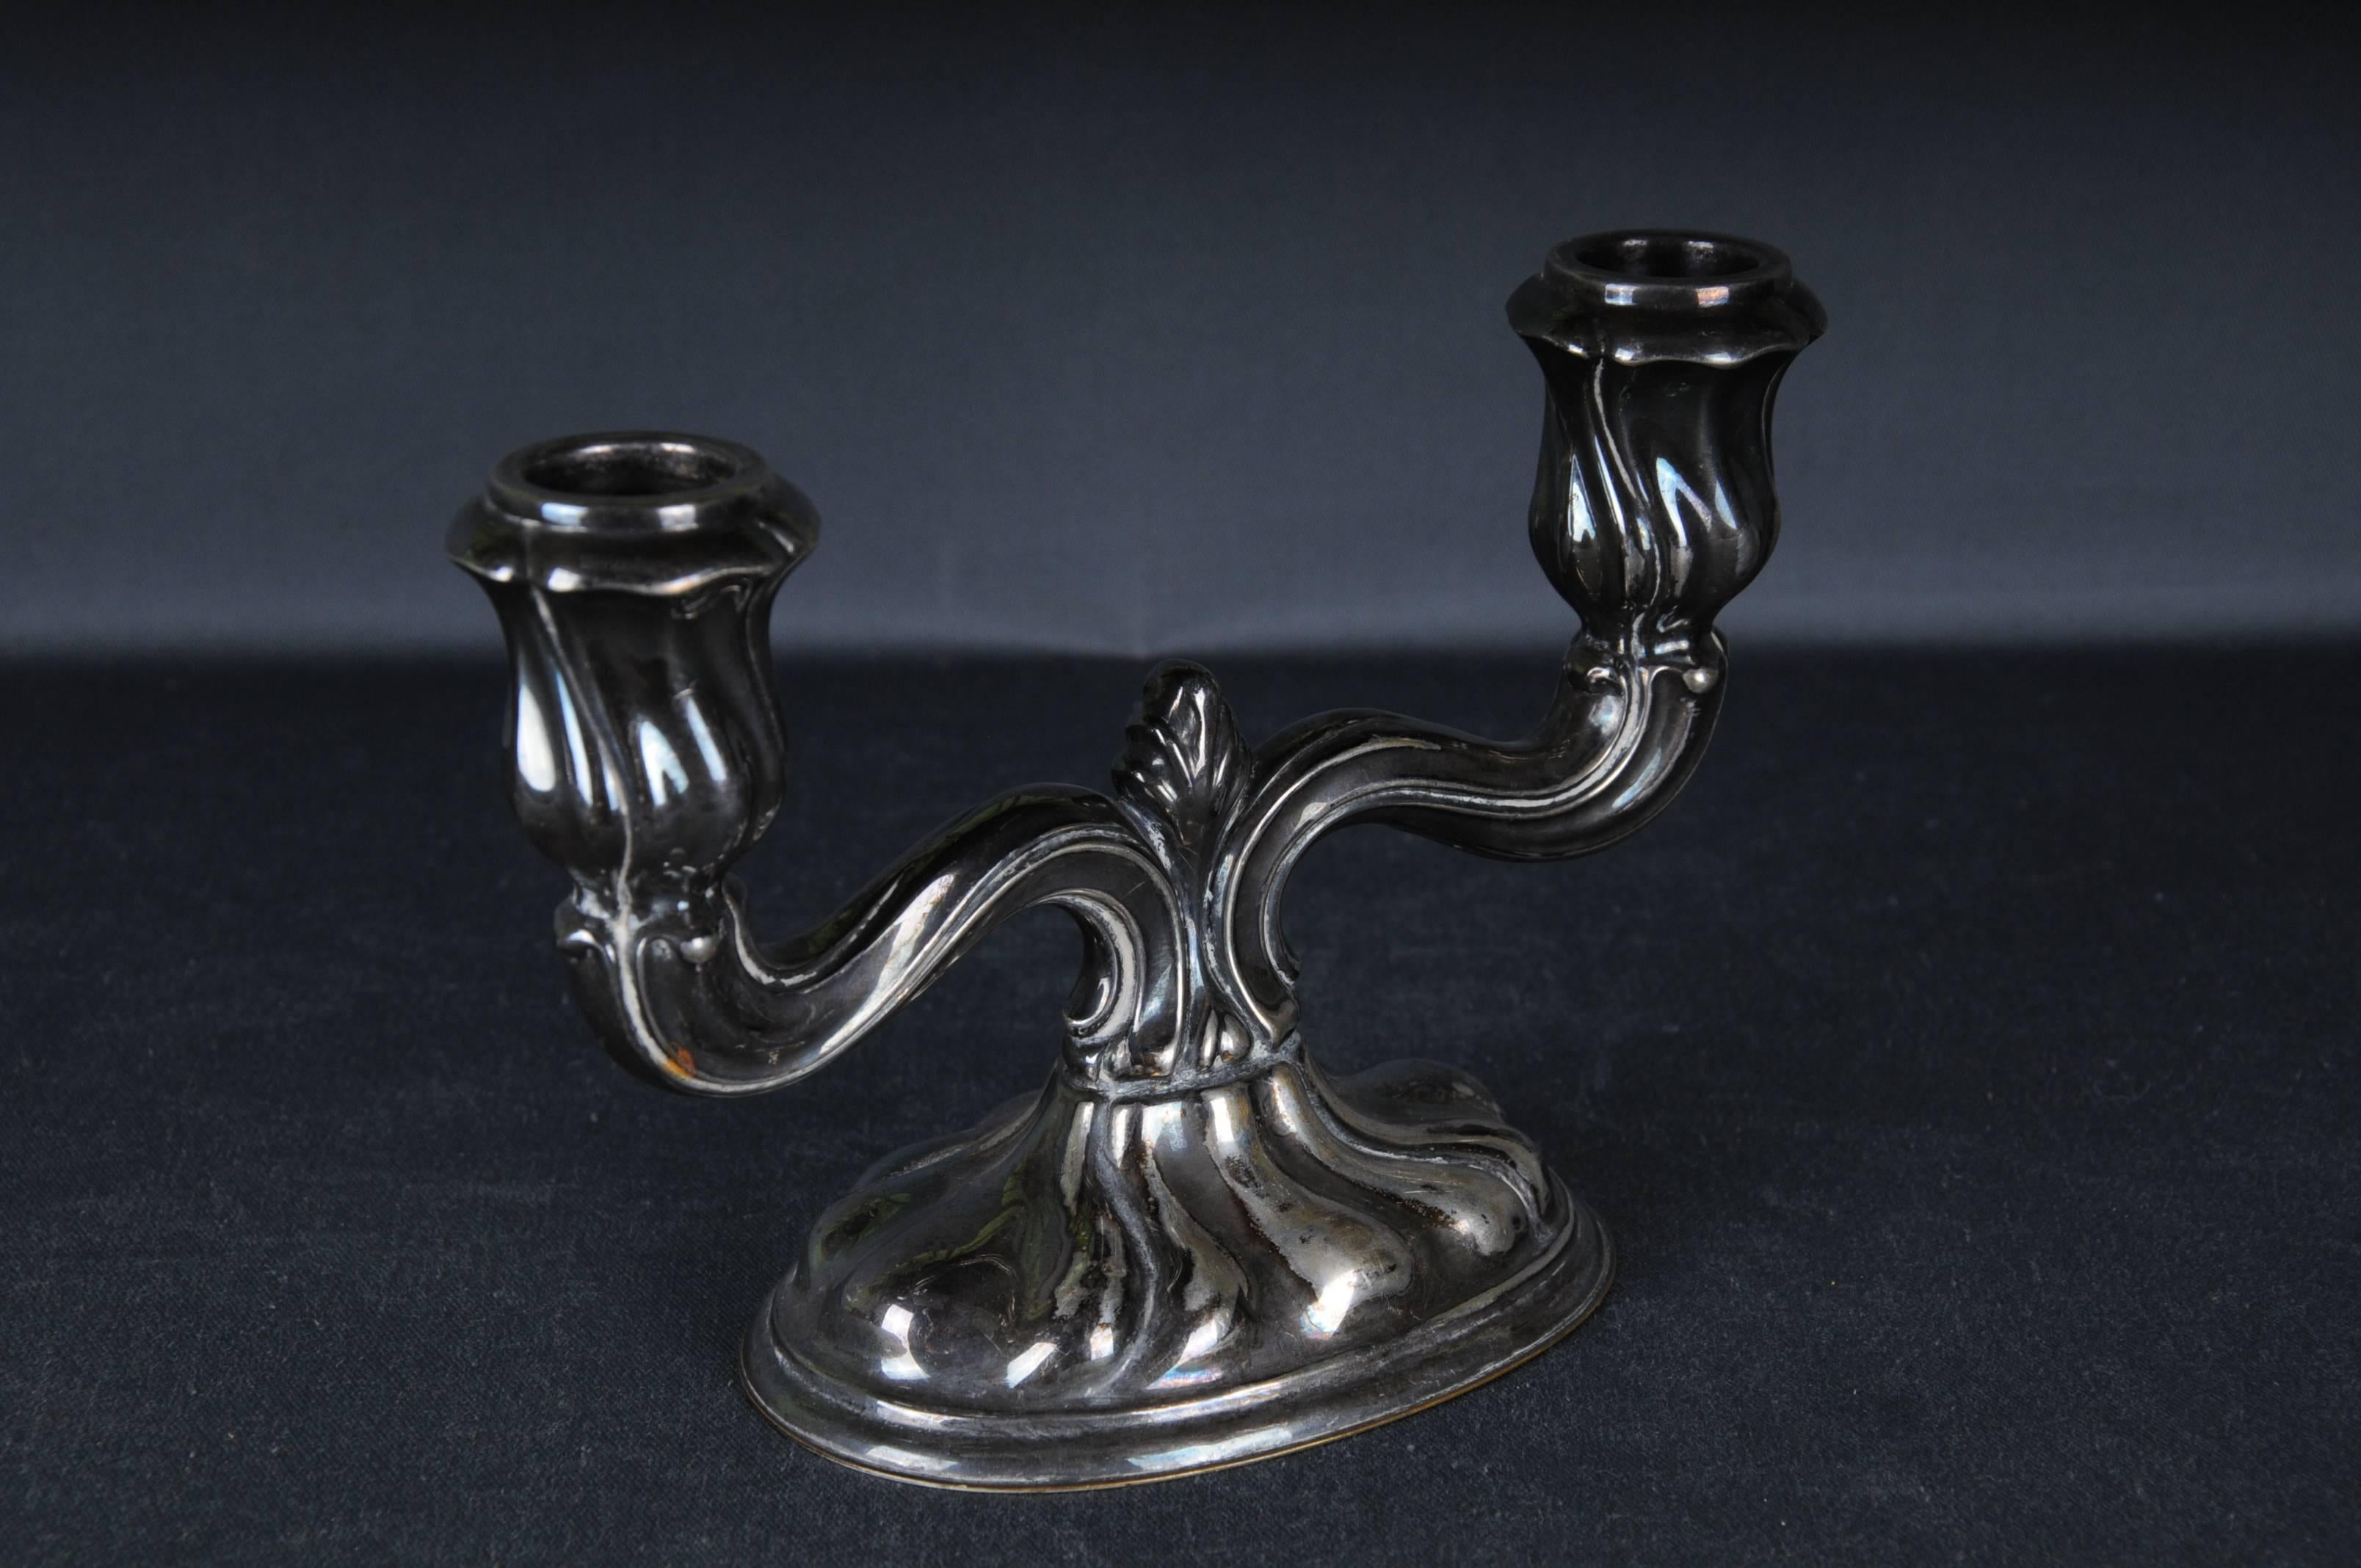 
High quality Silver Candlesticks 835 Germany Heidelberg

2-armed

The candlestick is weighted
Weight: 258 grams

The condition can be seen in the pictures.